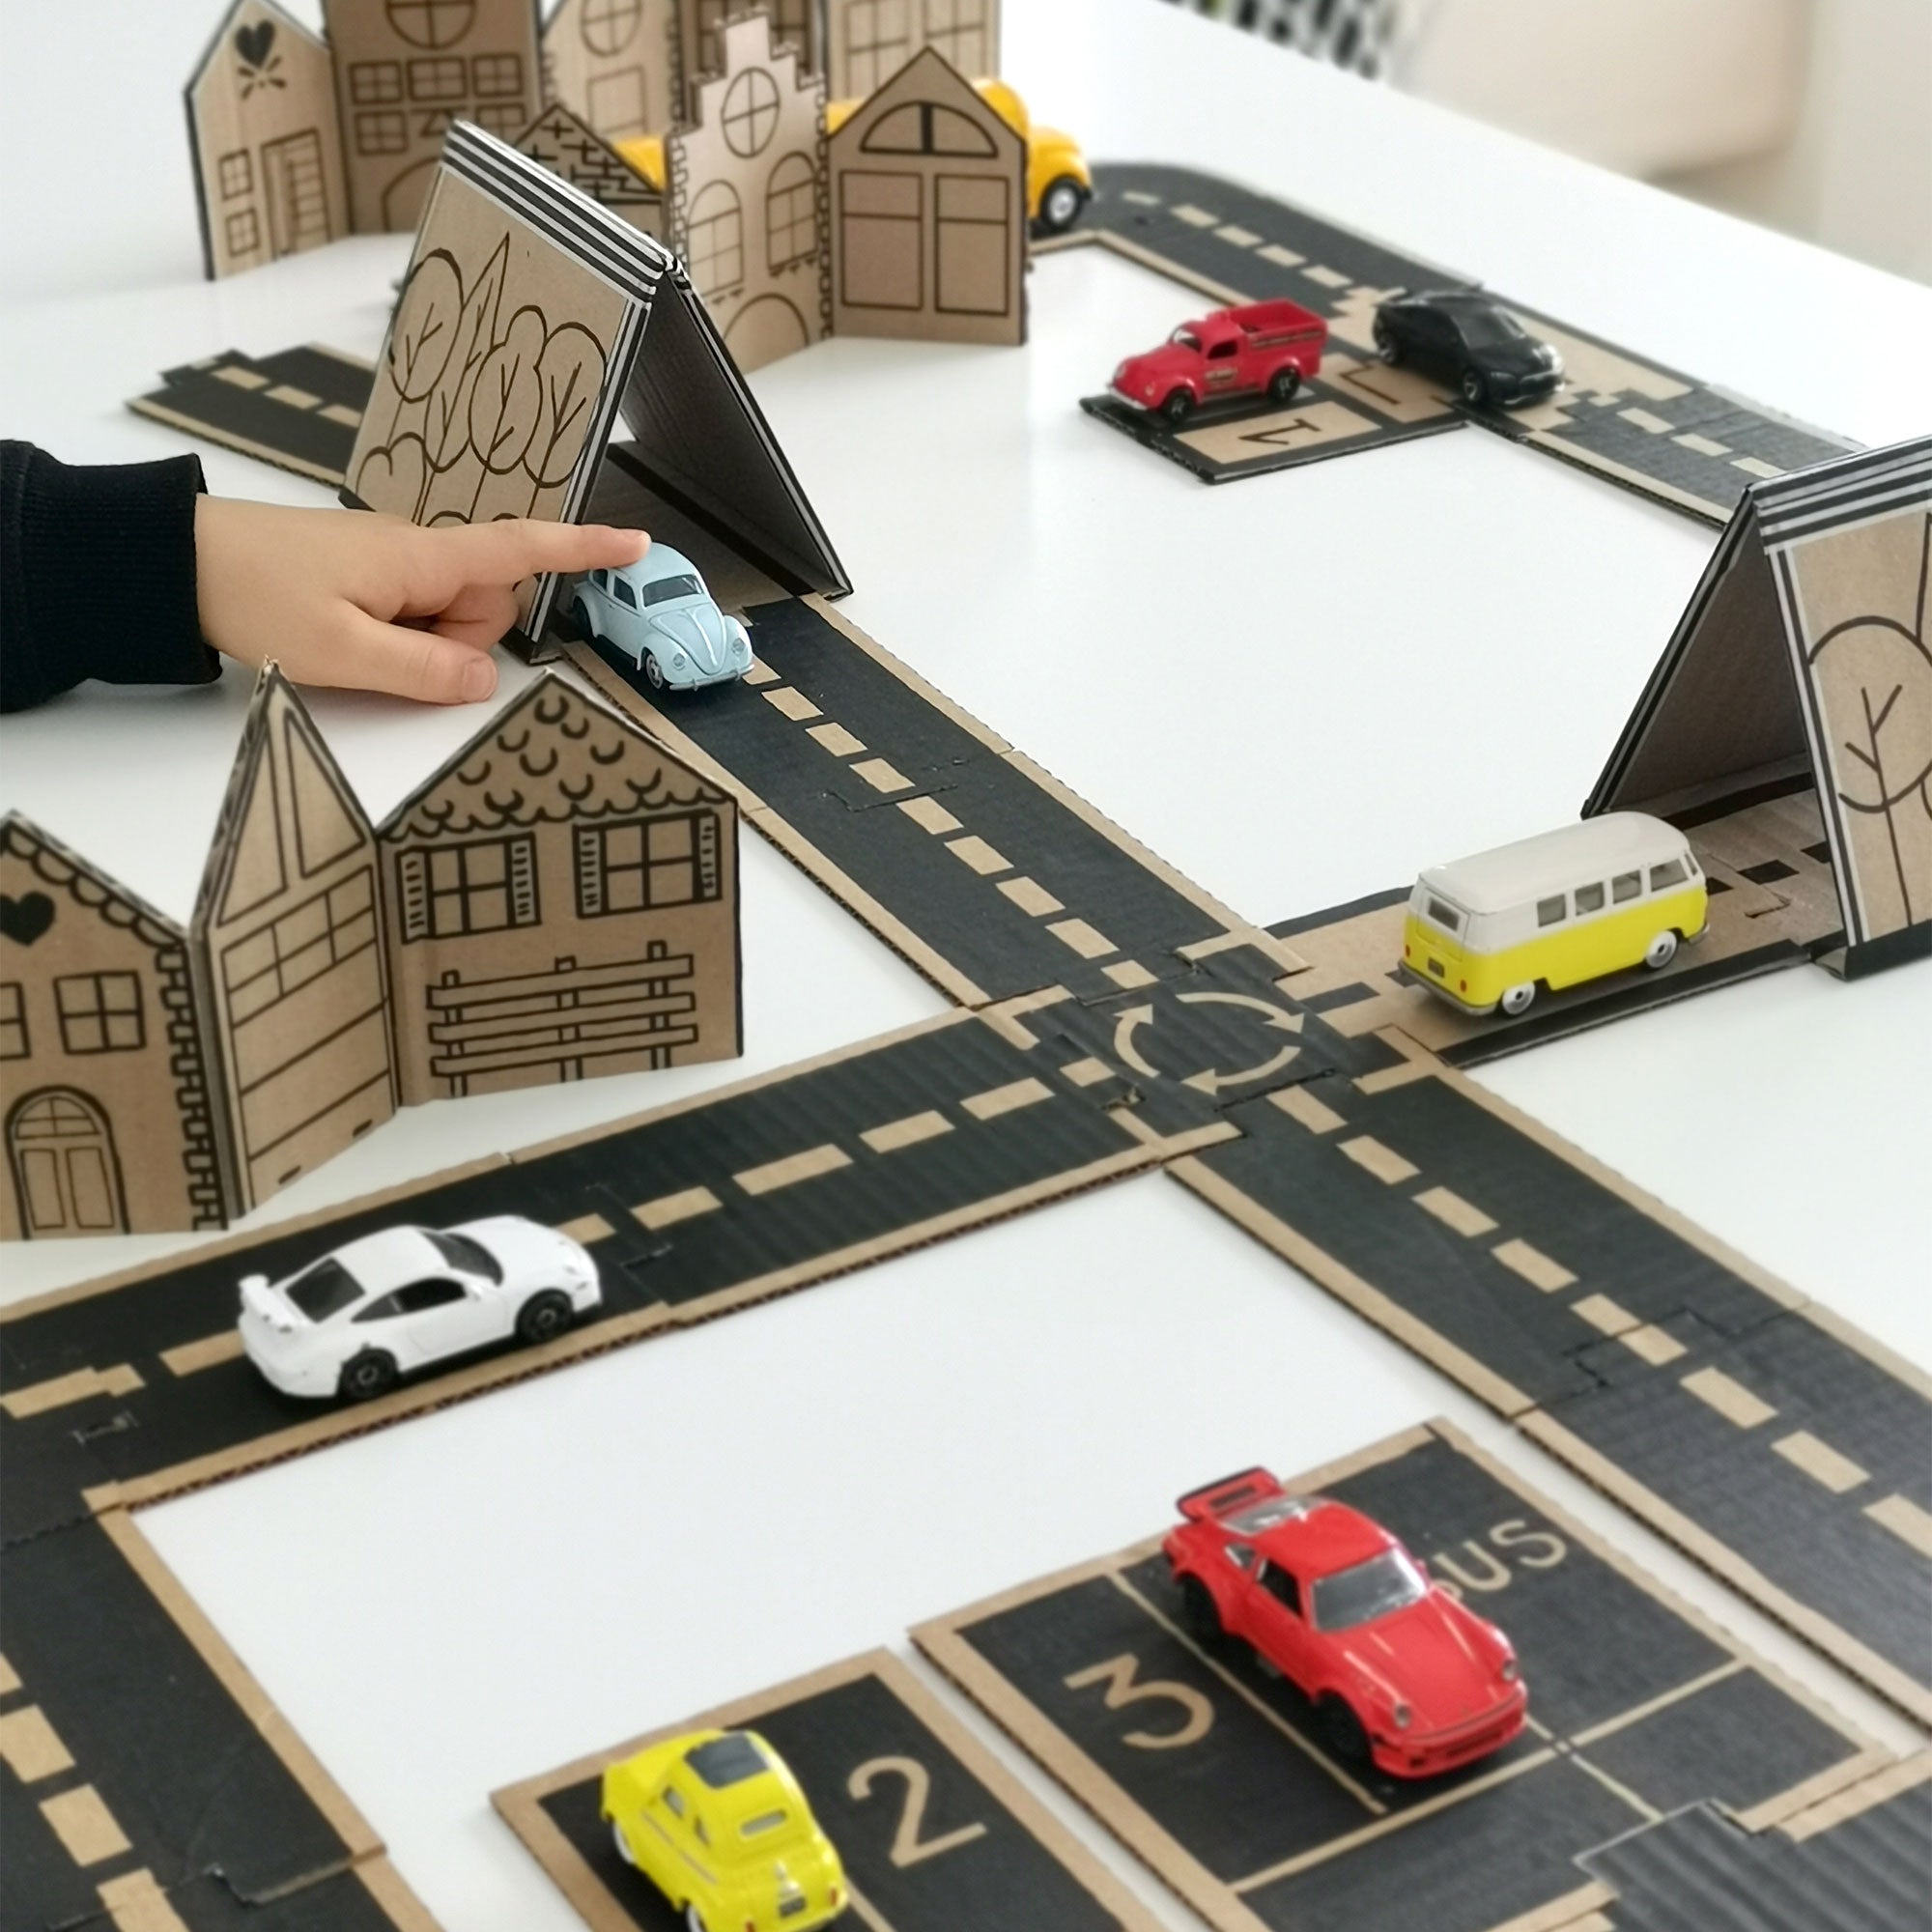 How to make a car track using recycled cardboard